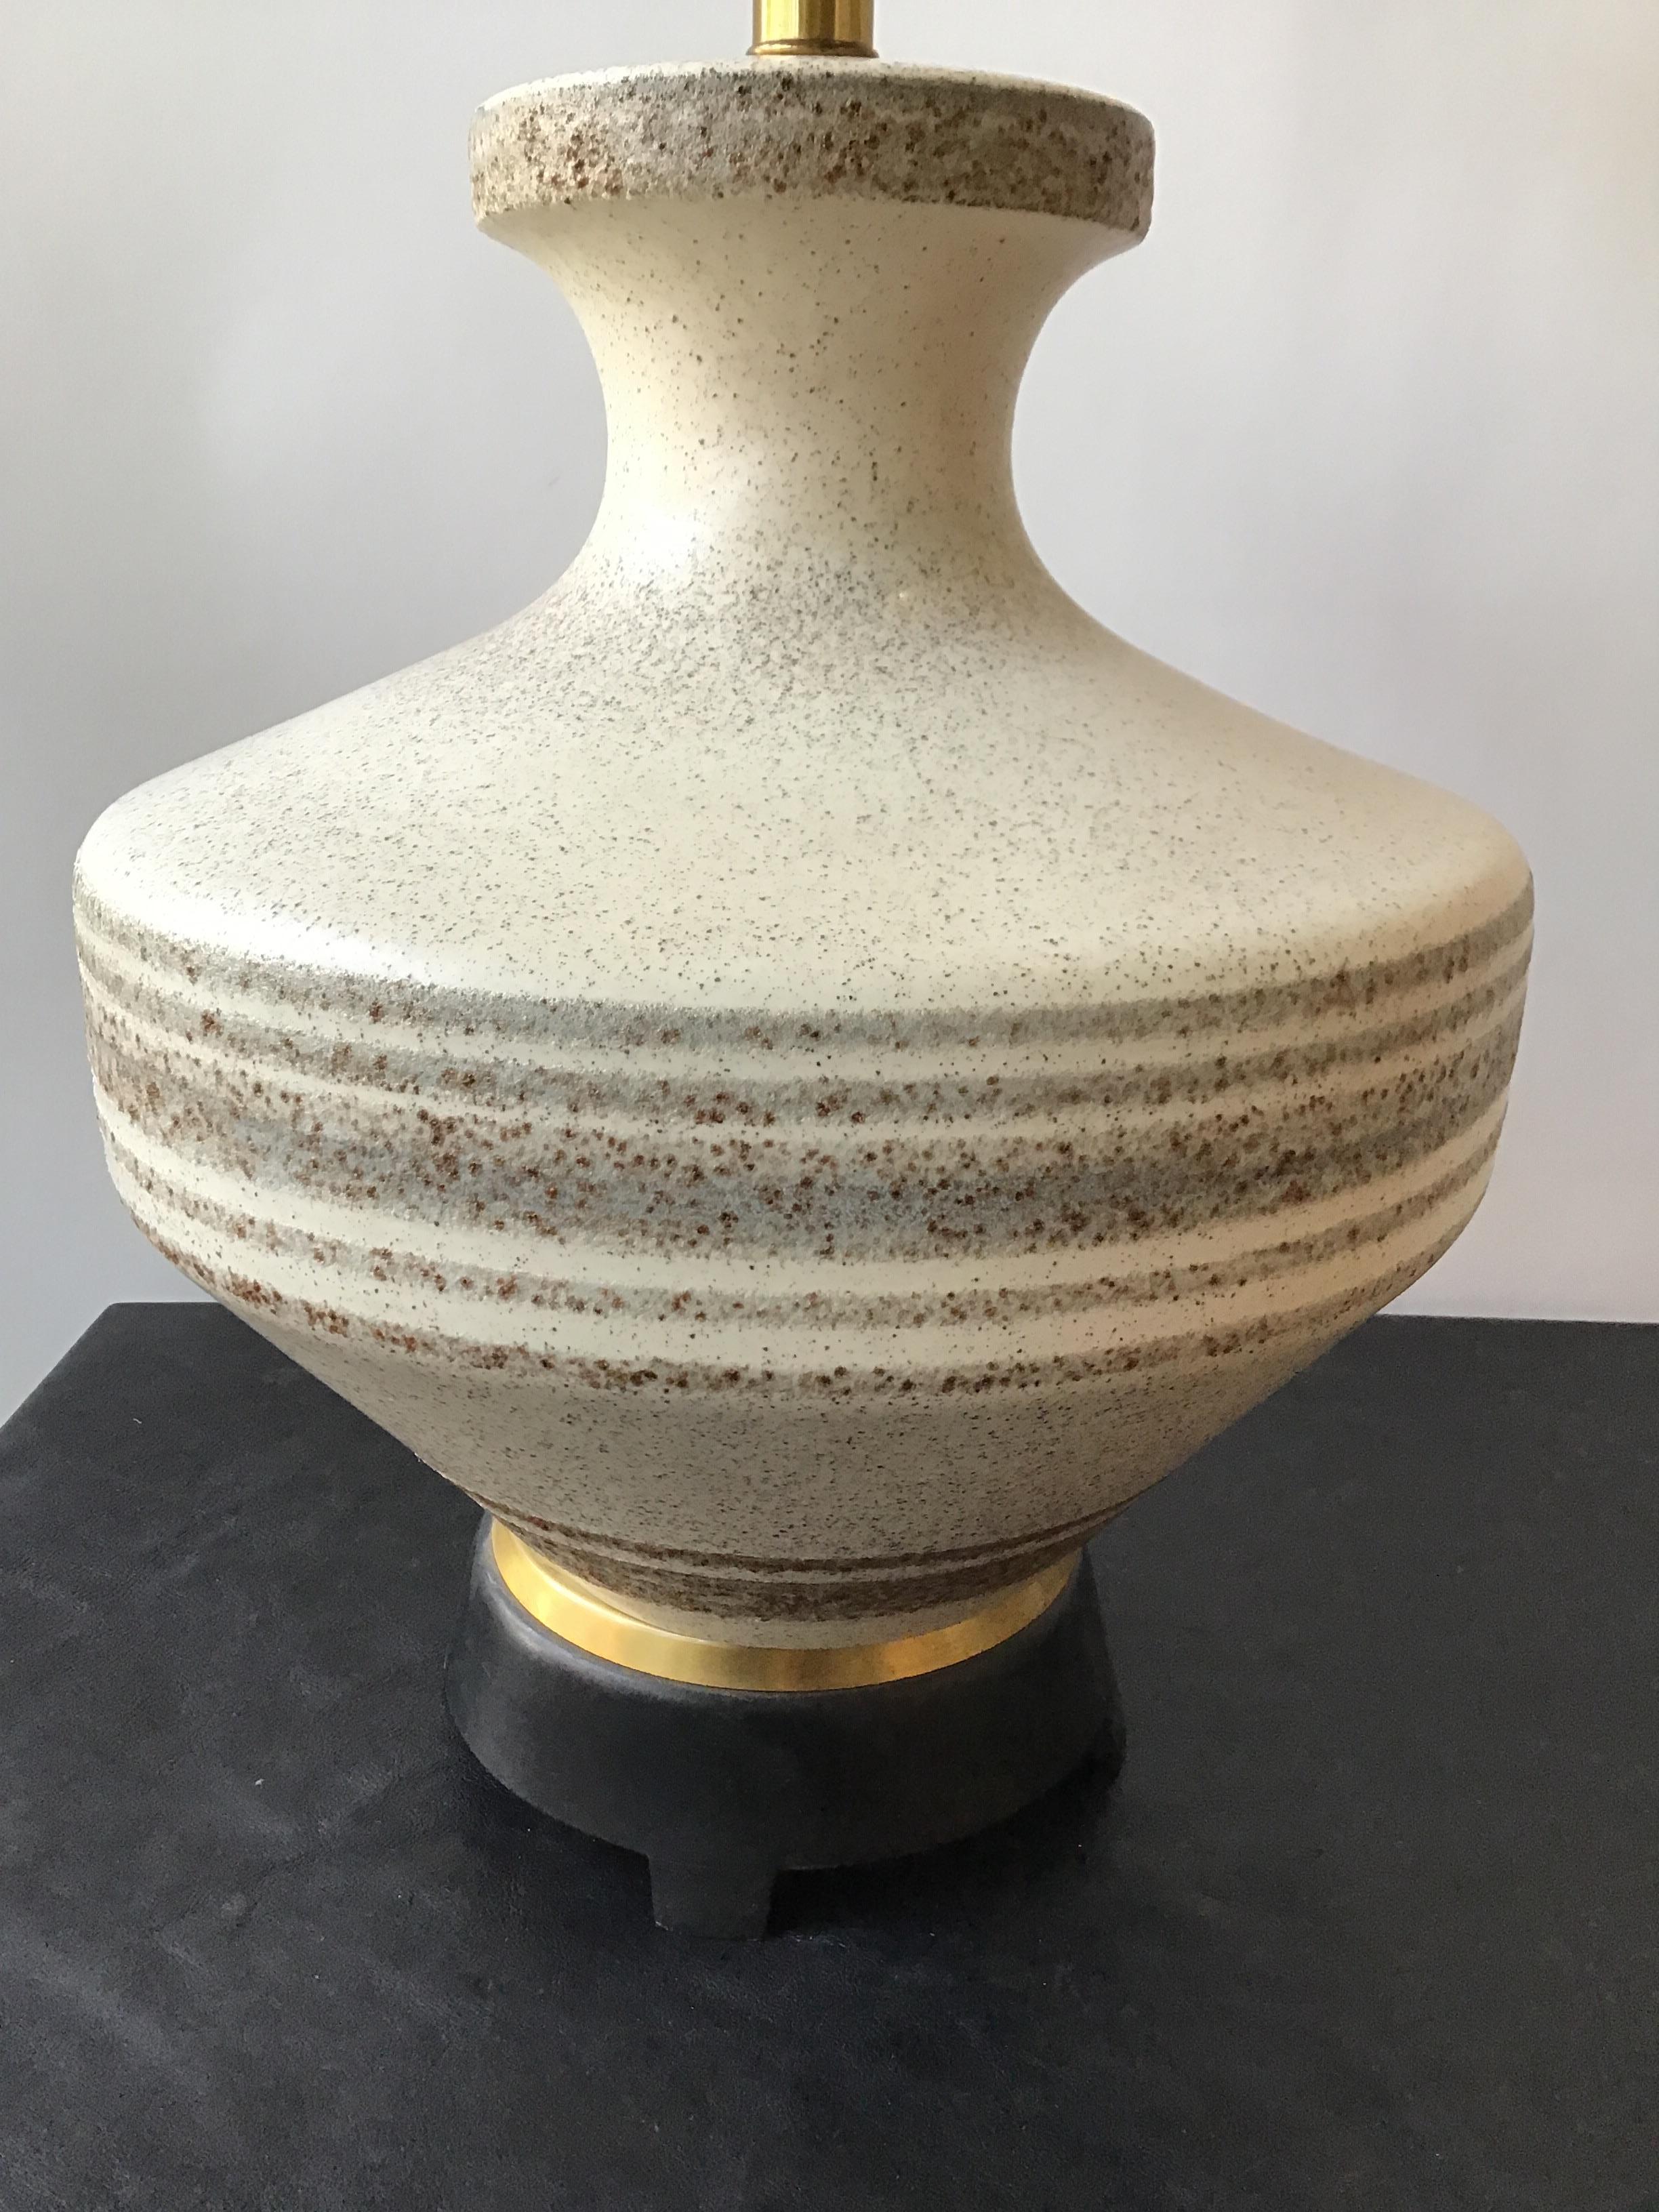 1950s Gerald Thurston ceramic lamp on wood and brass base. Ivory glazed porcelain lamps with speckled horizontal stripes.